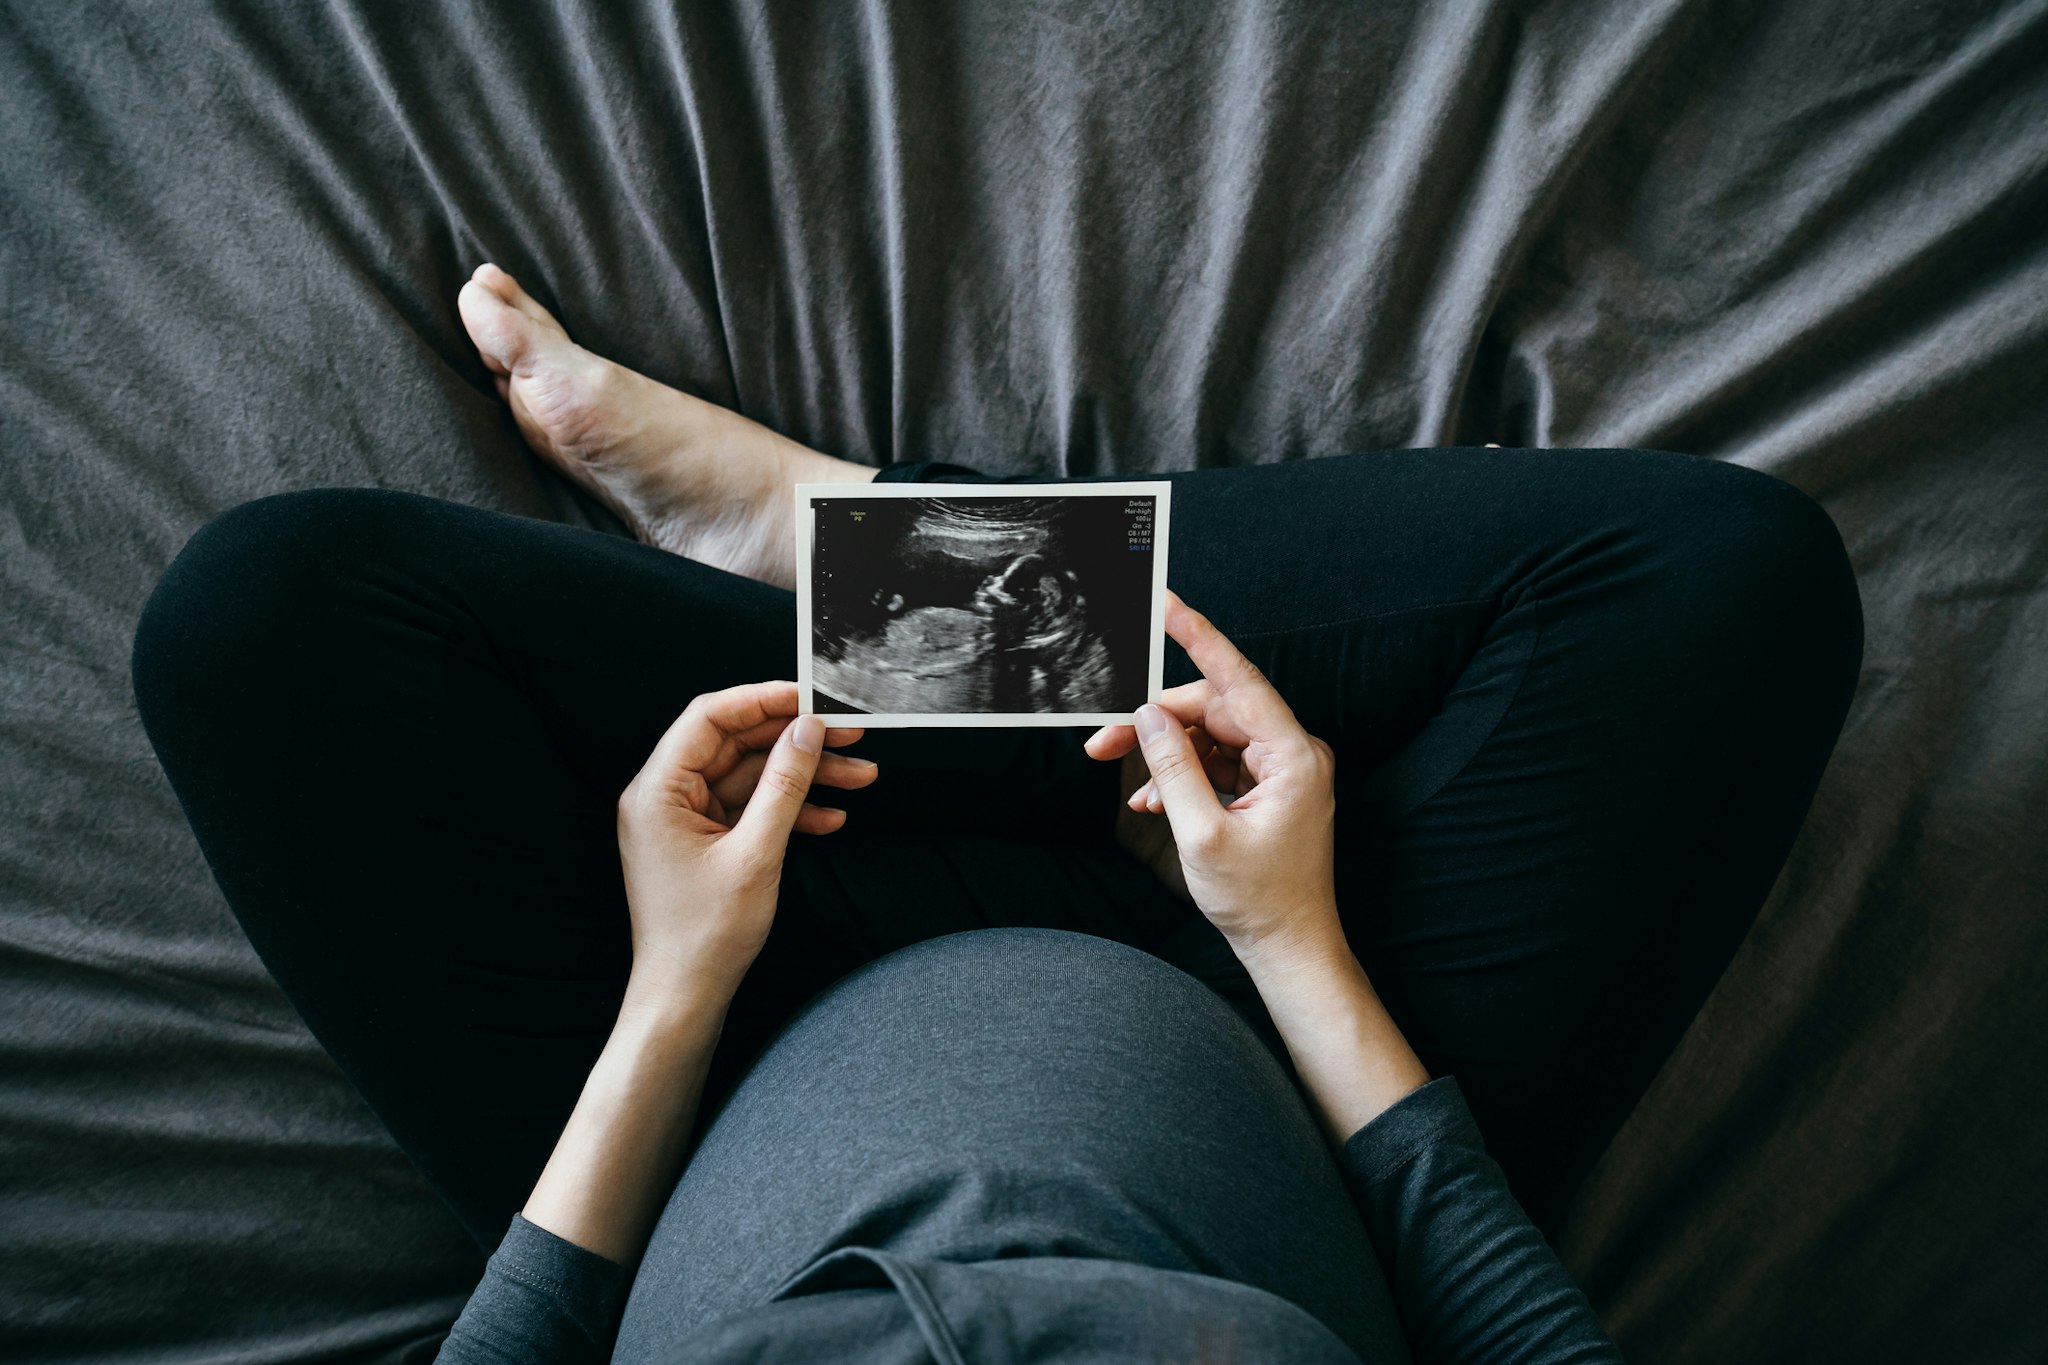 d3sign. Getty Images. High angle shot of Asian pregnant woman holding an ultrasound scan photo in front of her baby bump, sitting on bed at home. Mother-to-be. Precious moment in life. Preparation for a new family member. Expecting a new life. Baby and new life concept